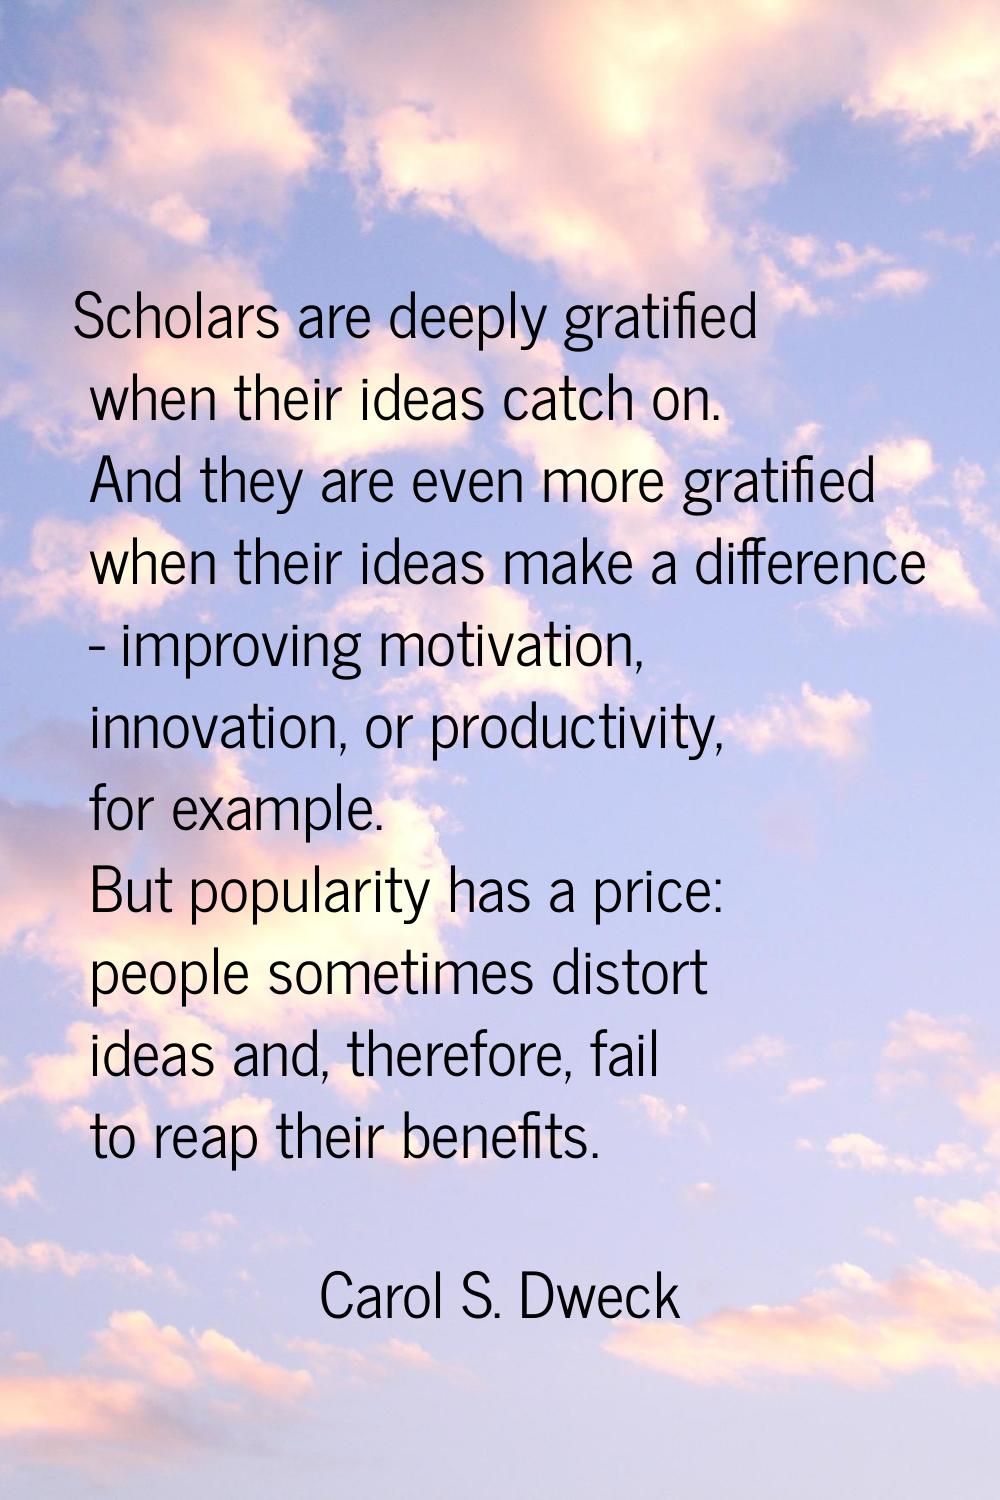 Scholars are deeply gratified when their ideas catch on. And they are even more gratified when thei